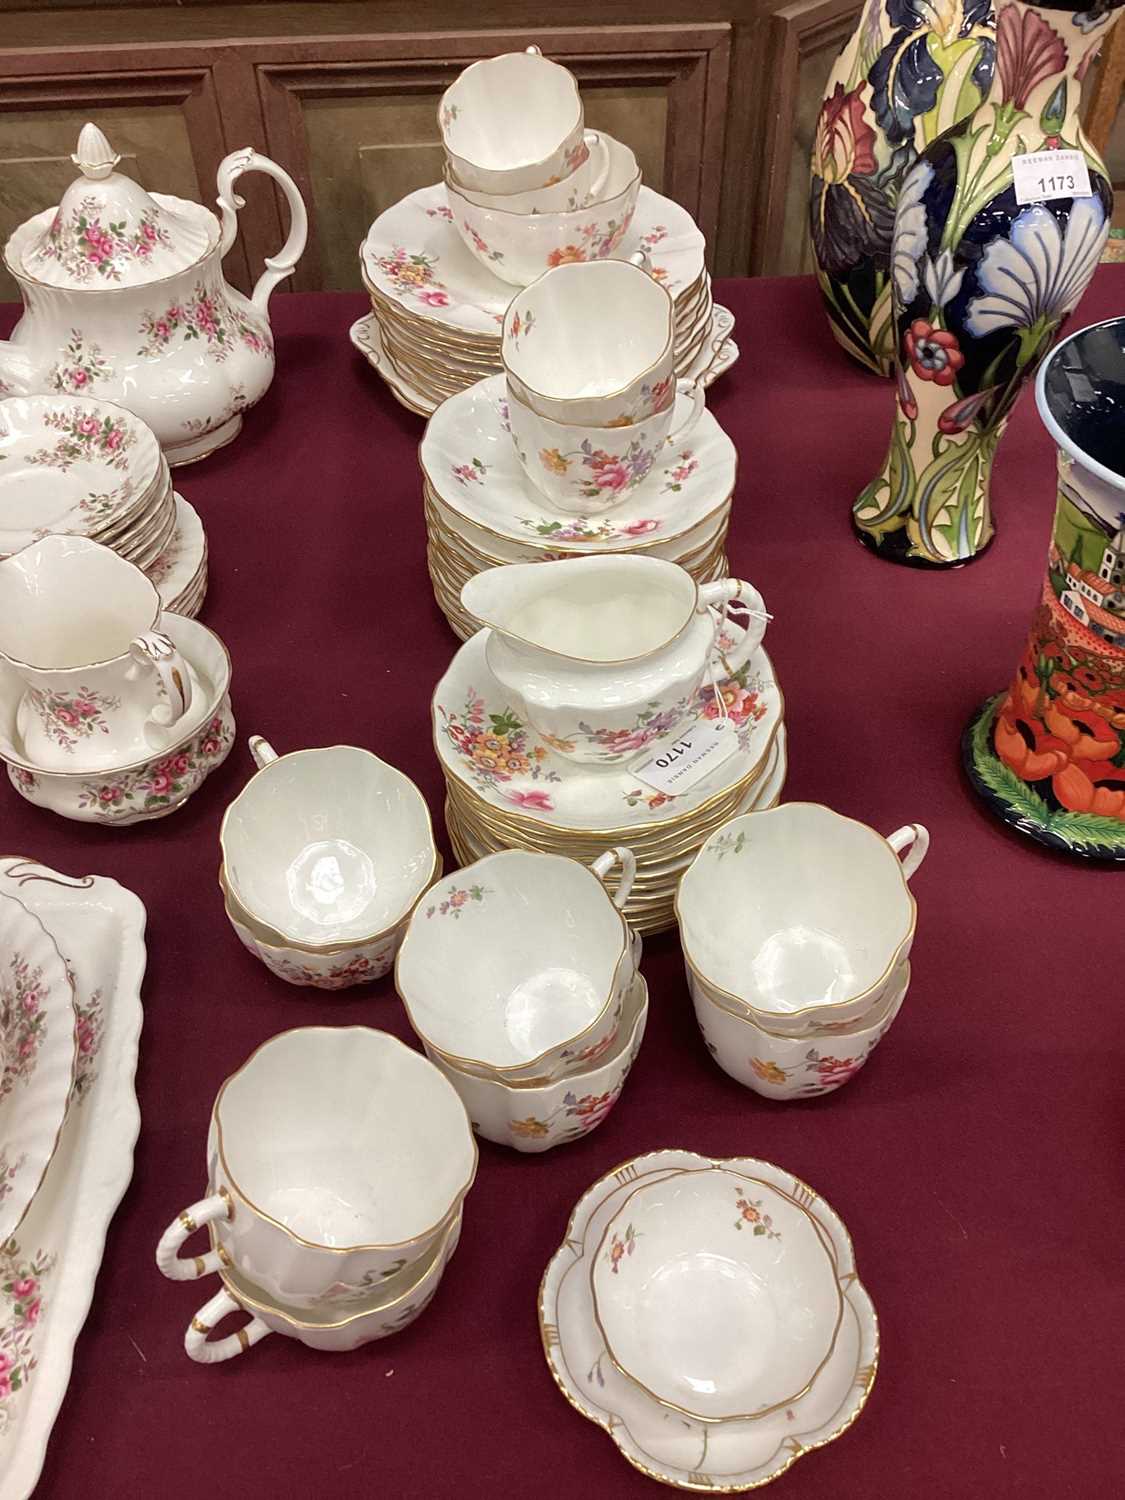 Royal Crown Derby 'Derby Posies' pattern tea and dinner service - 54 pieces